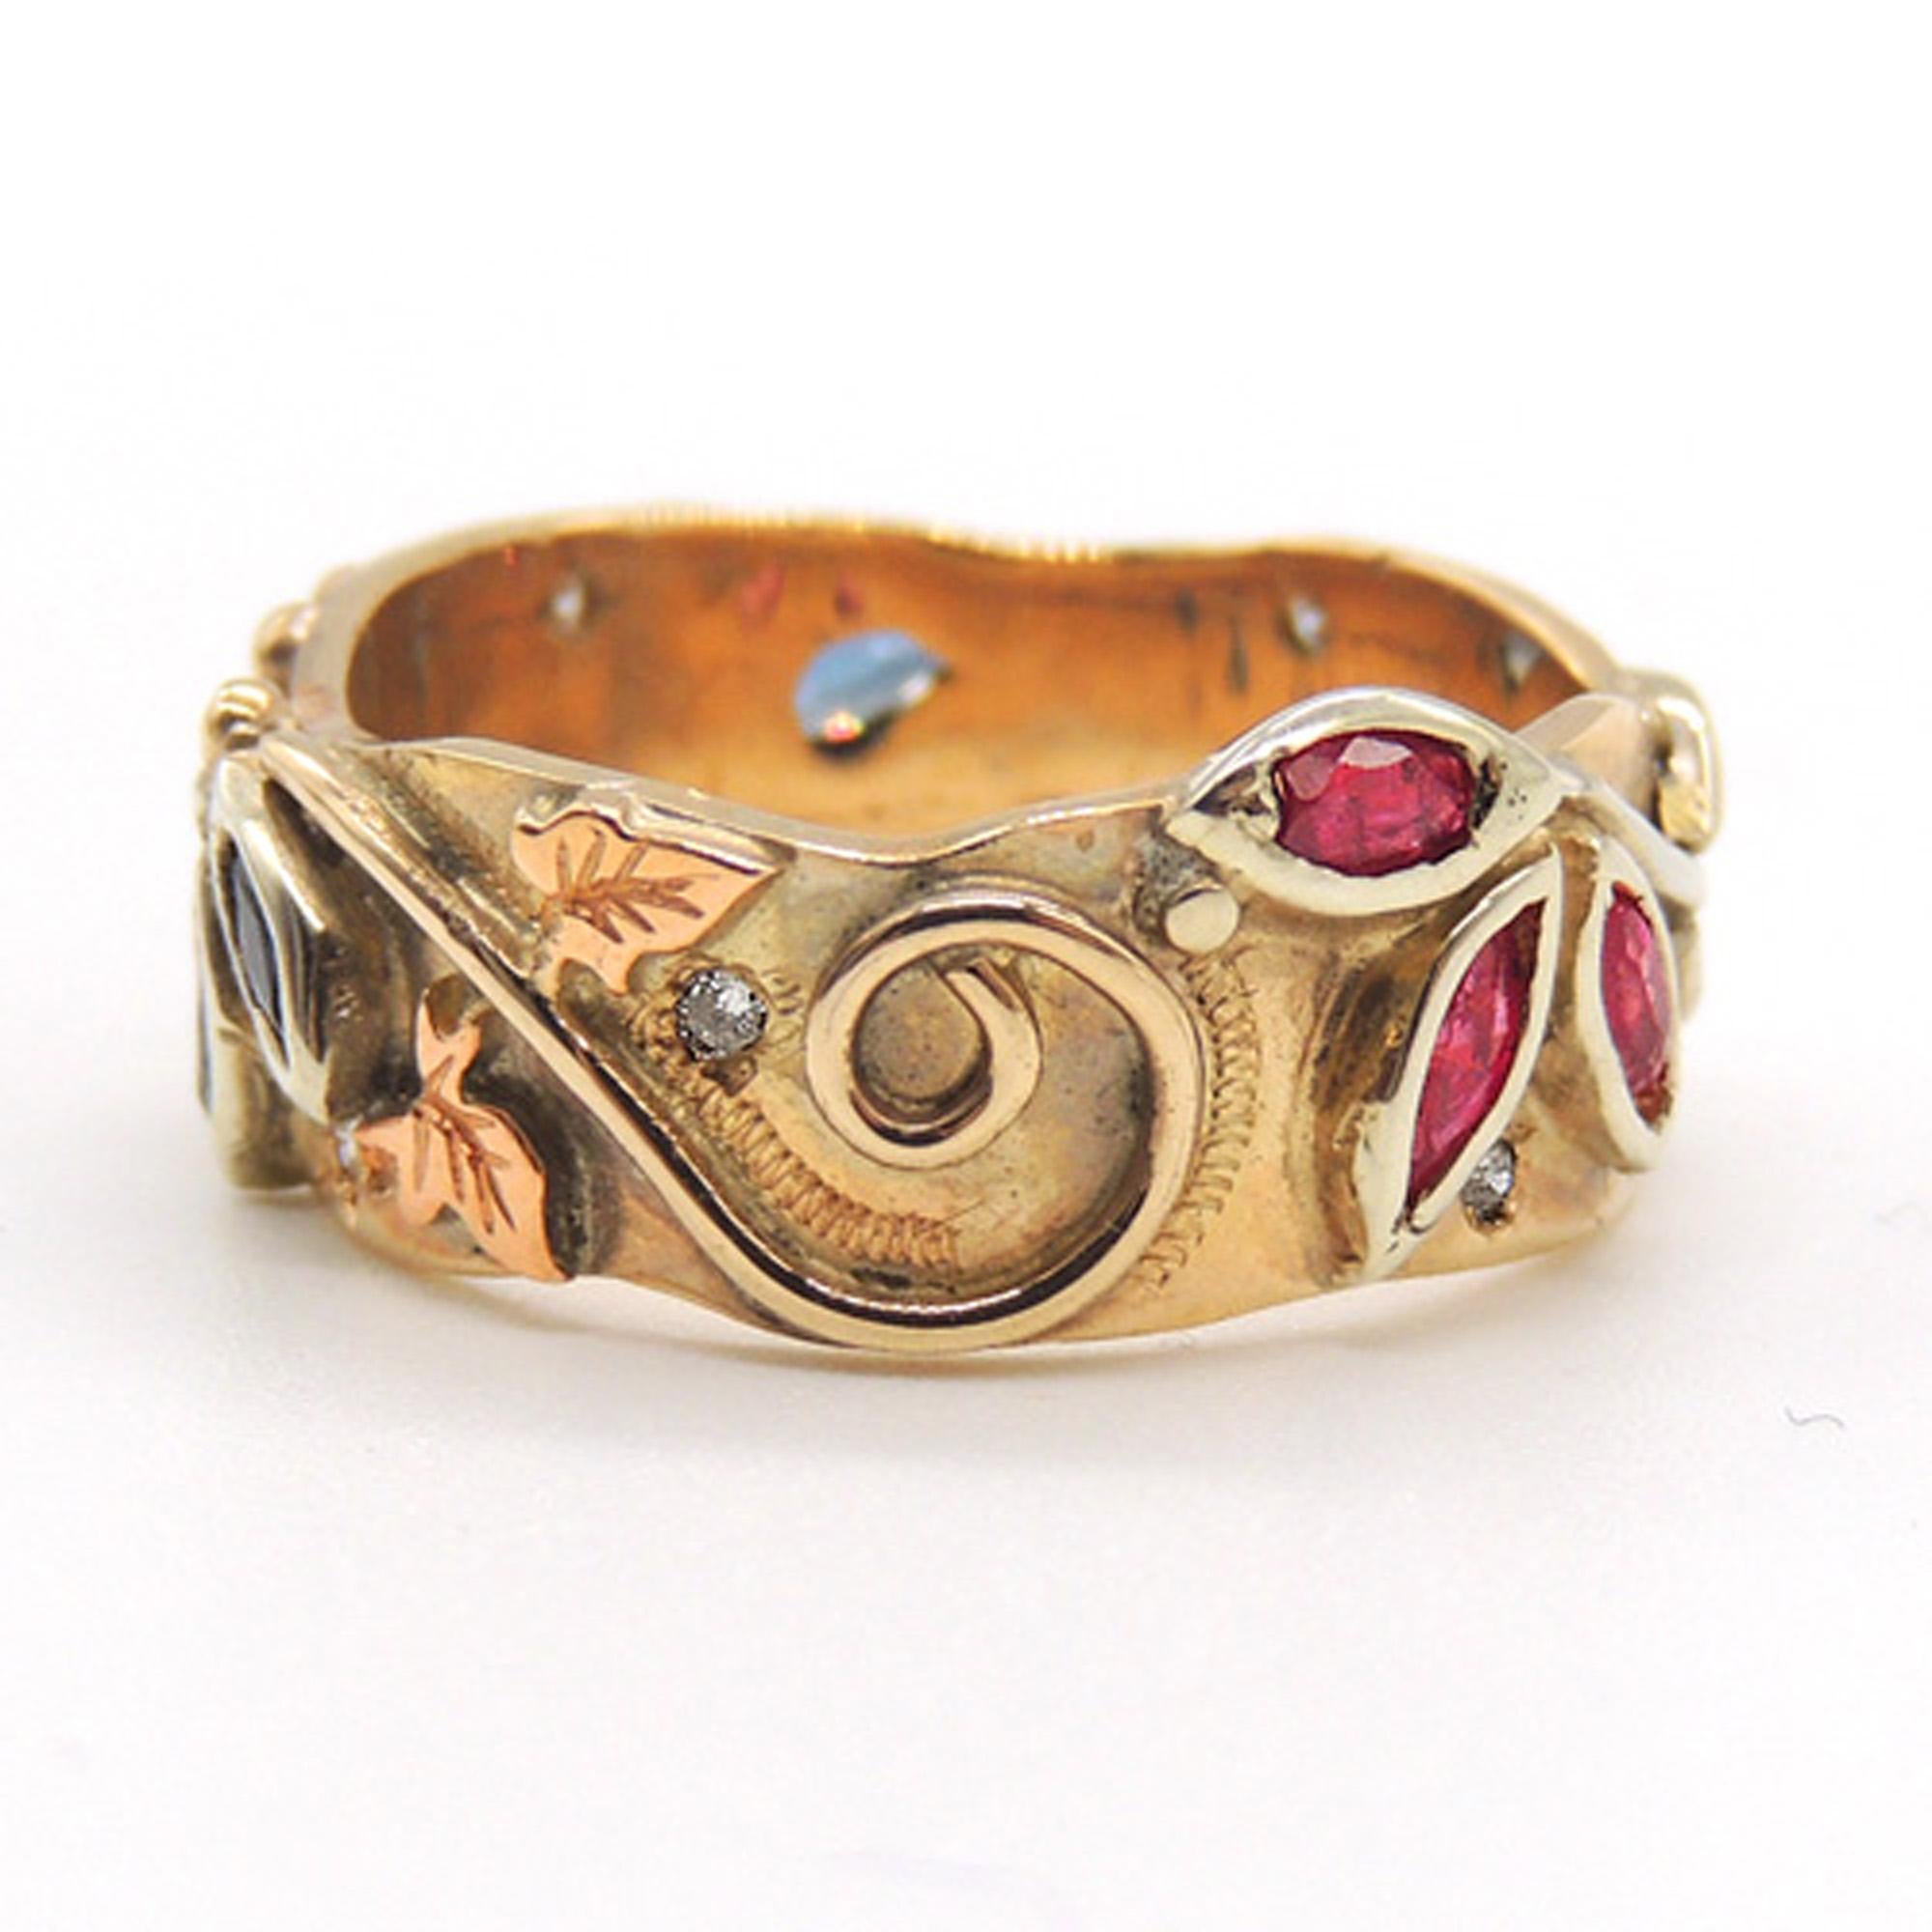 This is a beautiful handmade ring with a unique Autumnal 'art nouveau' design.

The ring is totally handmade in 9k yellow, white and rose gold.
It is set with good quality rubies, sapphires and diamonds all the way round.

The ring is a size P1/2